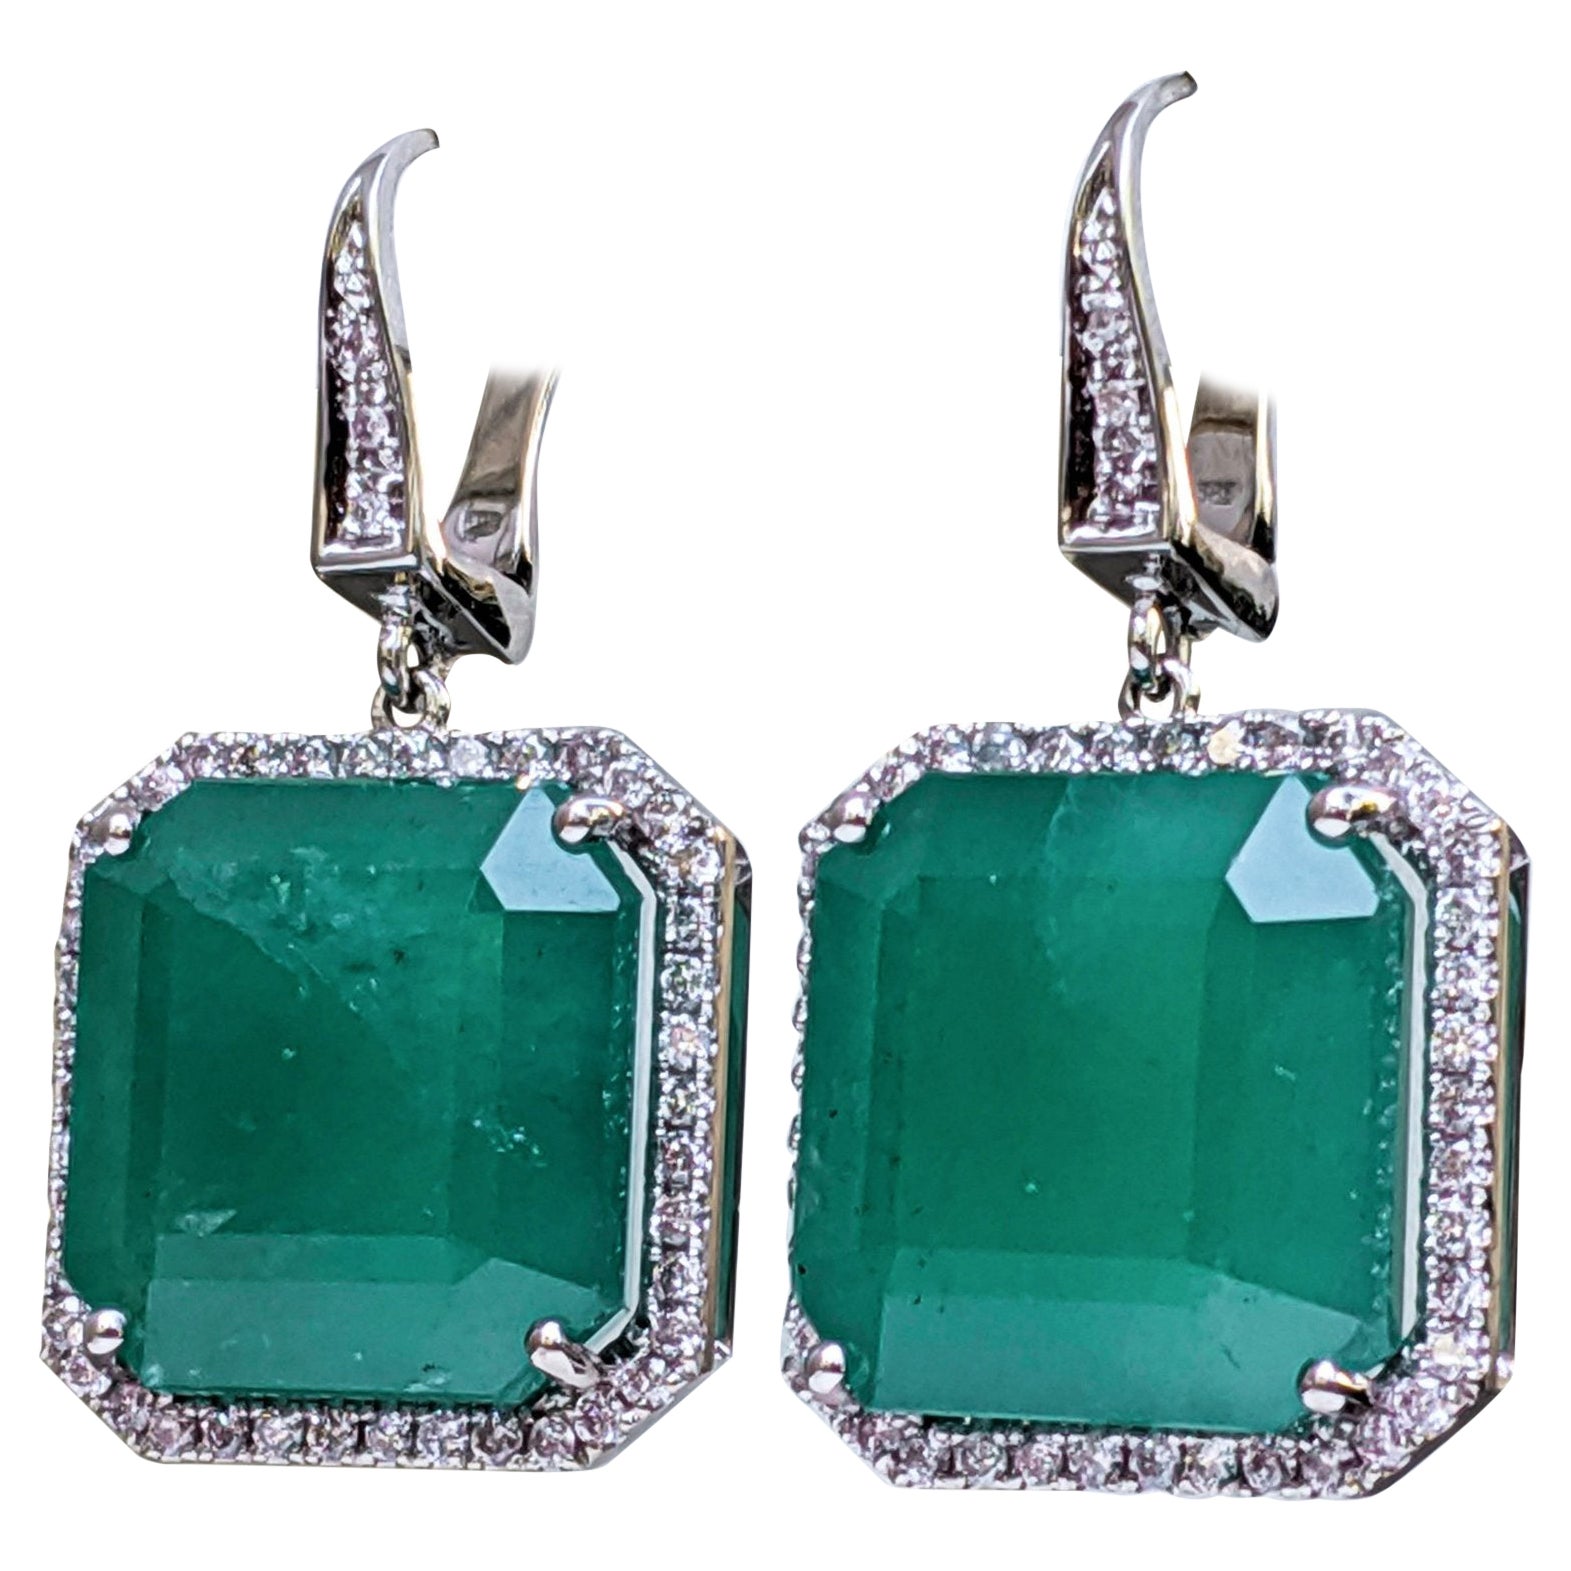 NO RESERVE! IGI 37.00Ct Emerald & 0.90Ct Diamonds - 18 kt. White gold - Earrings For Sale